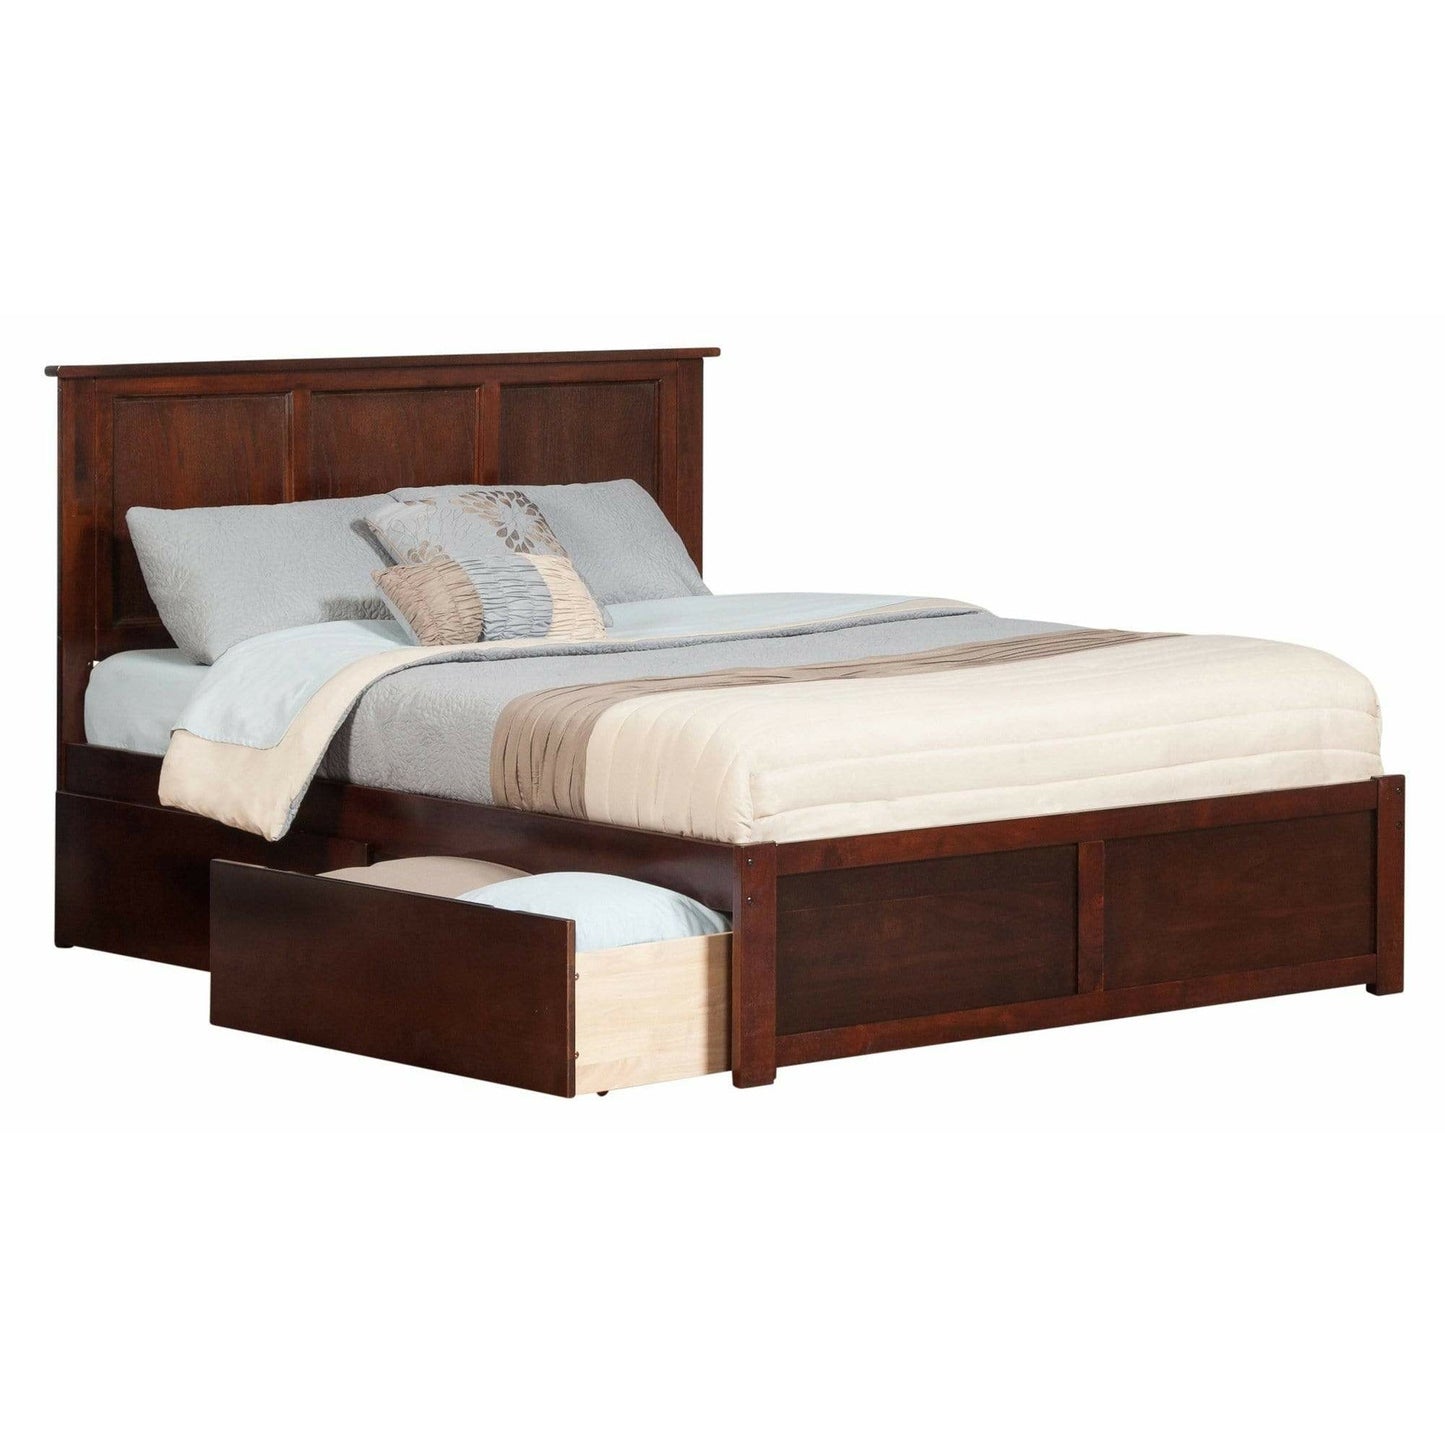 Atlantic Furniture Bed Madison Queen Platform Bed with Flat Panel Foot Board and 2 Urban Bed Drawers in Espresso